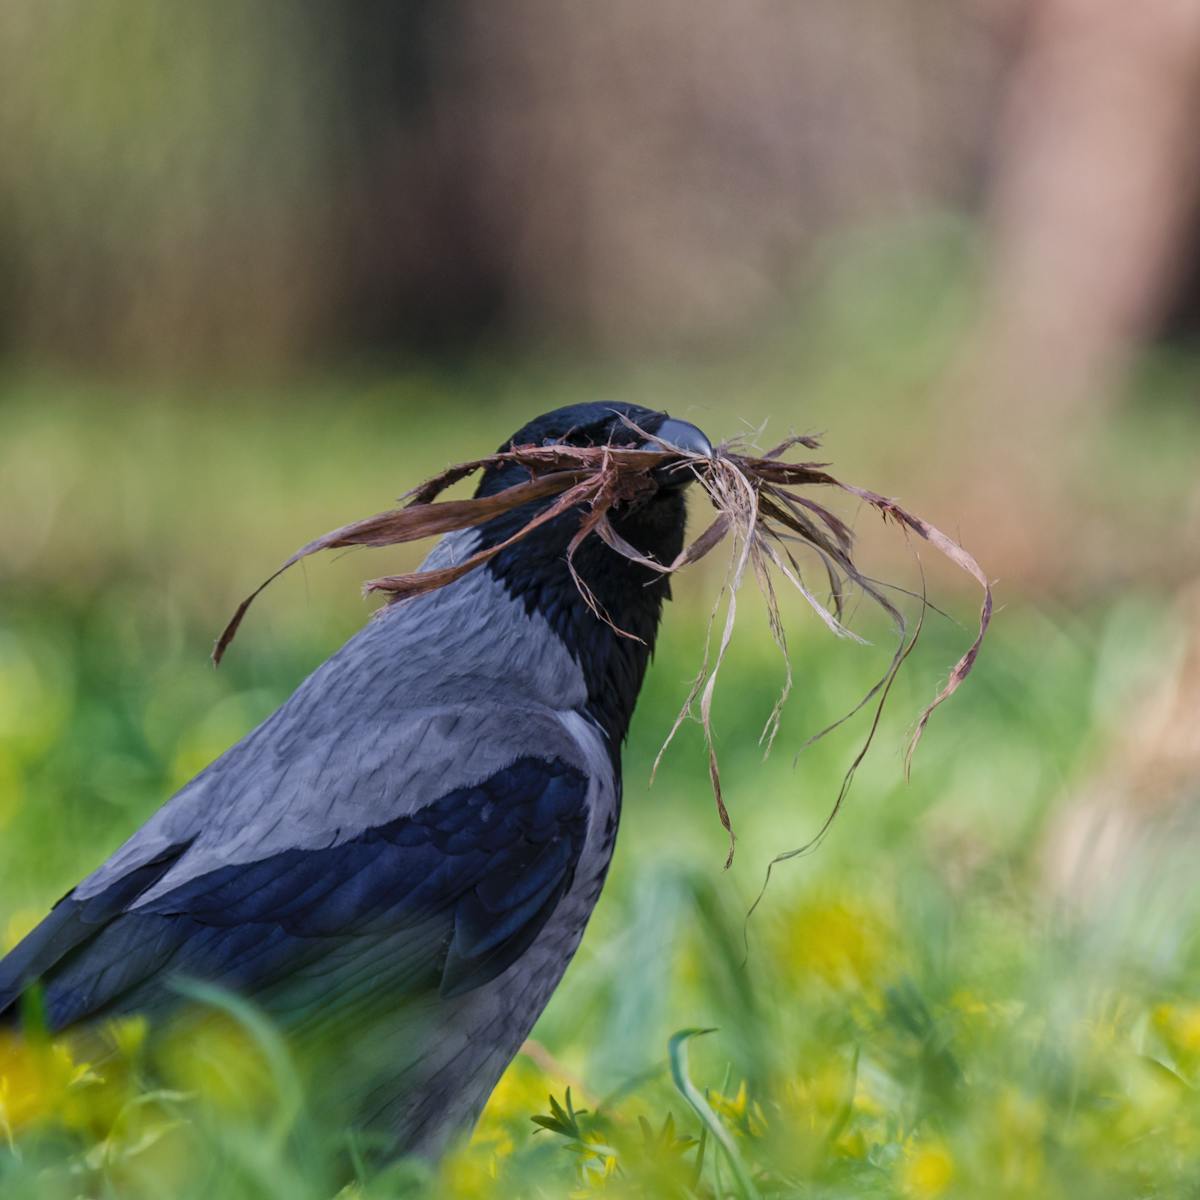 Clever crows can plan for the future like humans do